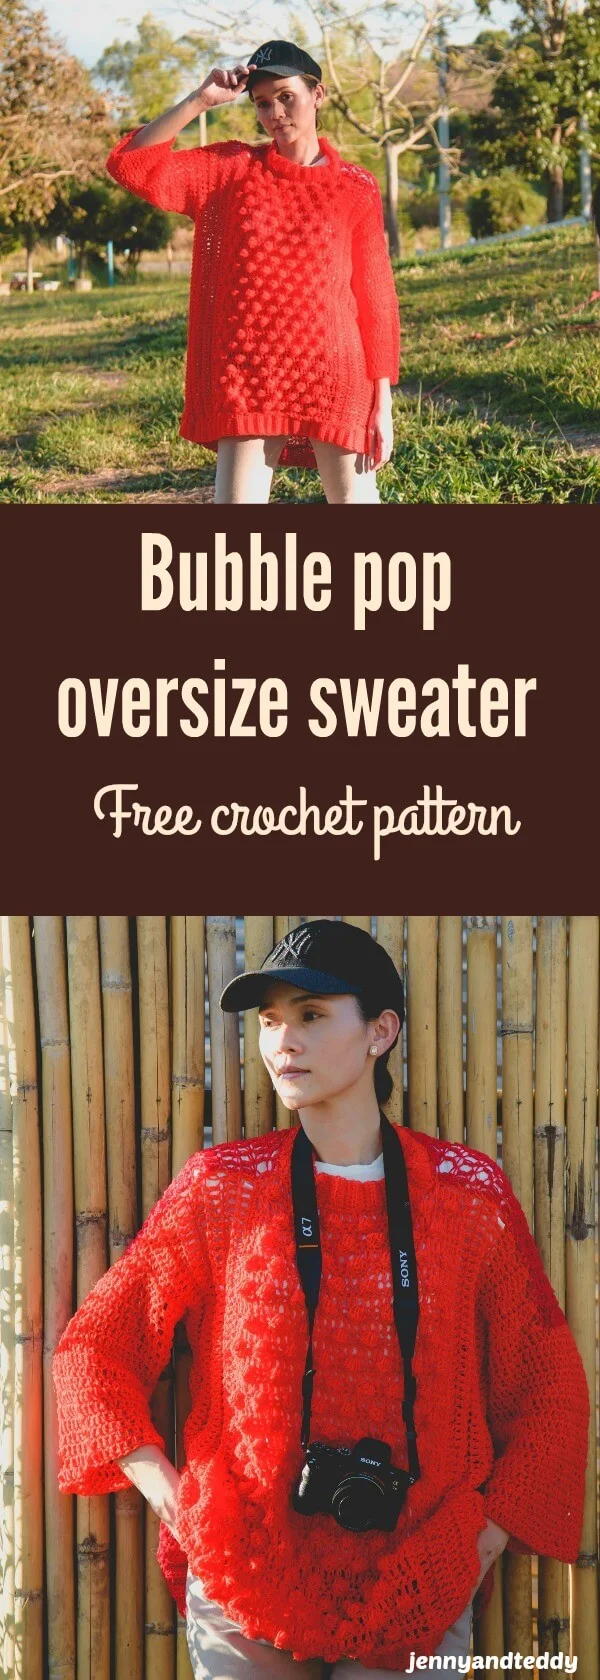 easy crochet oversized bobble sweater free pattern with video tutorial.